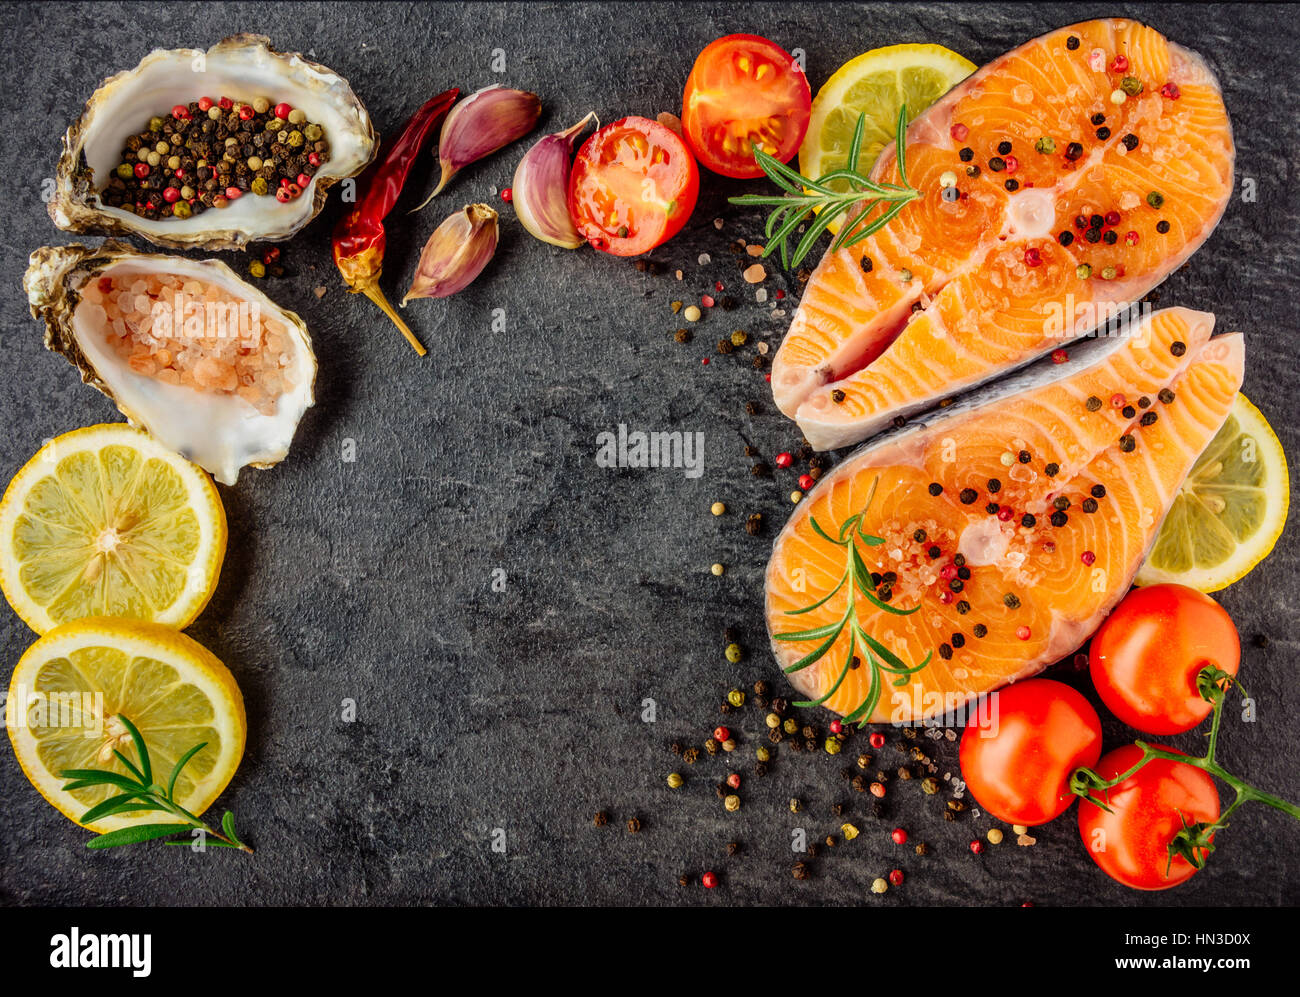 Delicious salmon steak , rich in omega 3 oil, with aromatic herbs and spices with a lemon, tomato, garlic on black background. Healthy and diet food.  Stock Photo